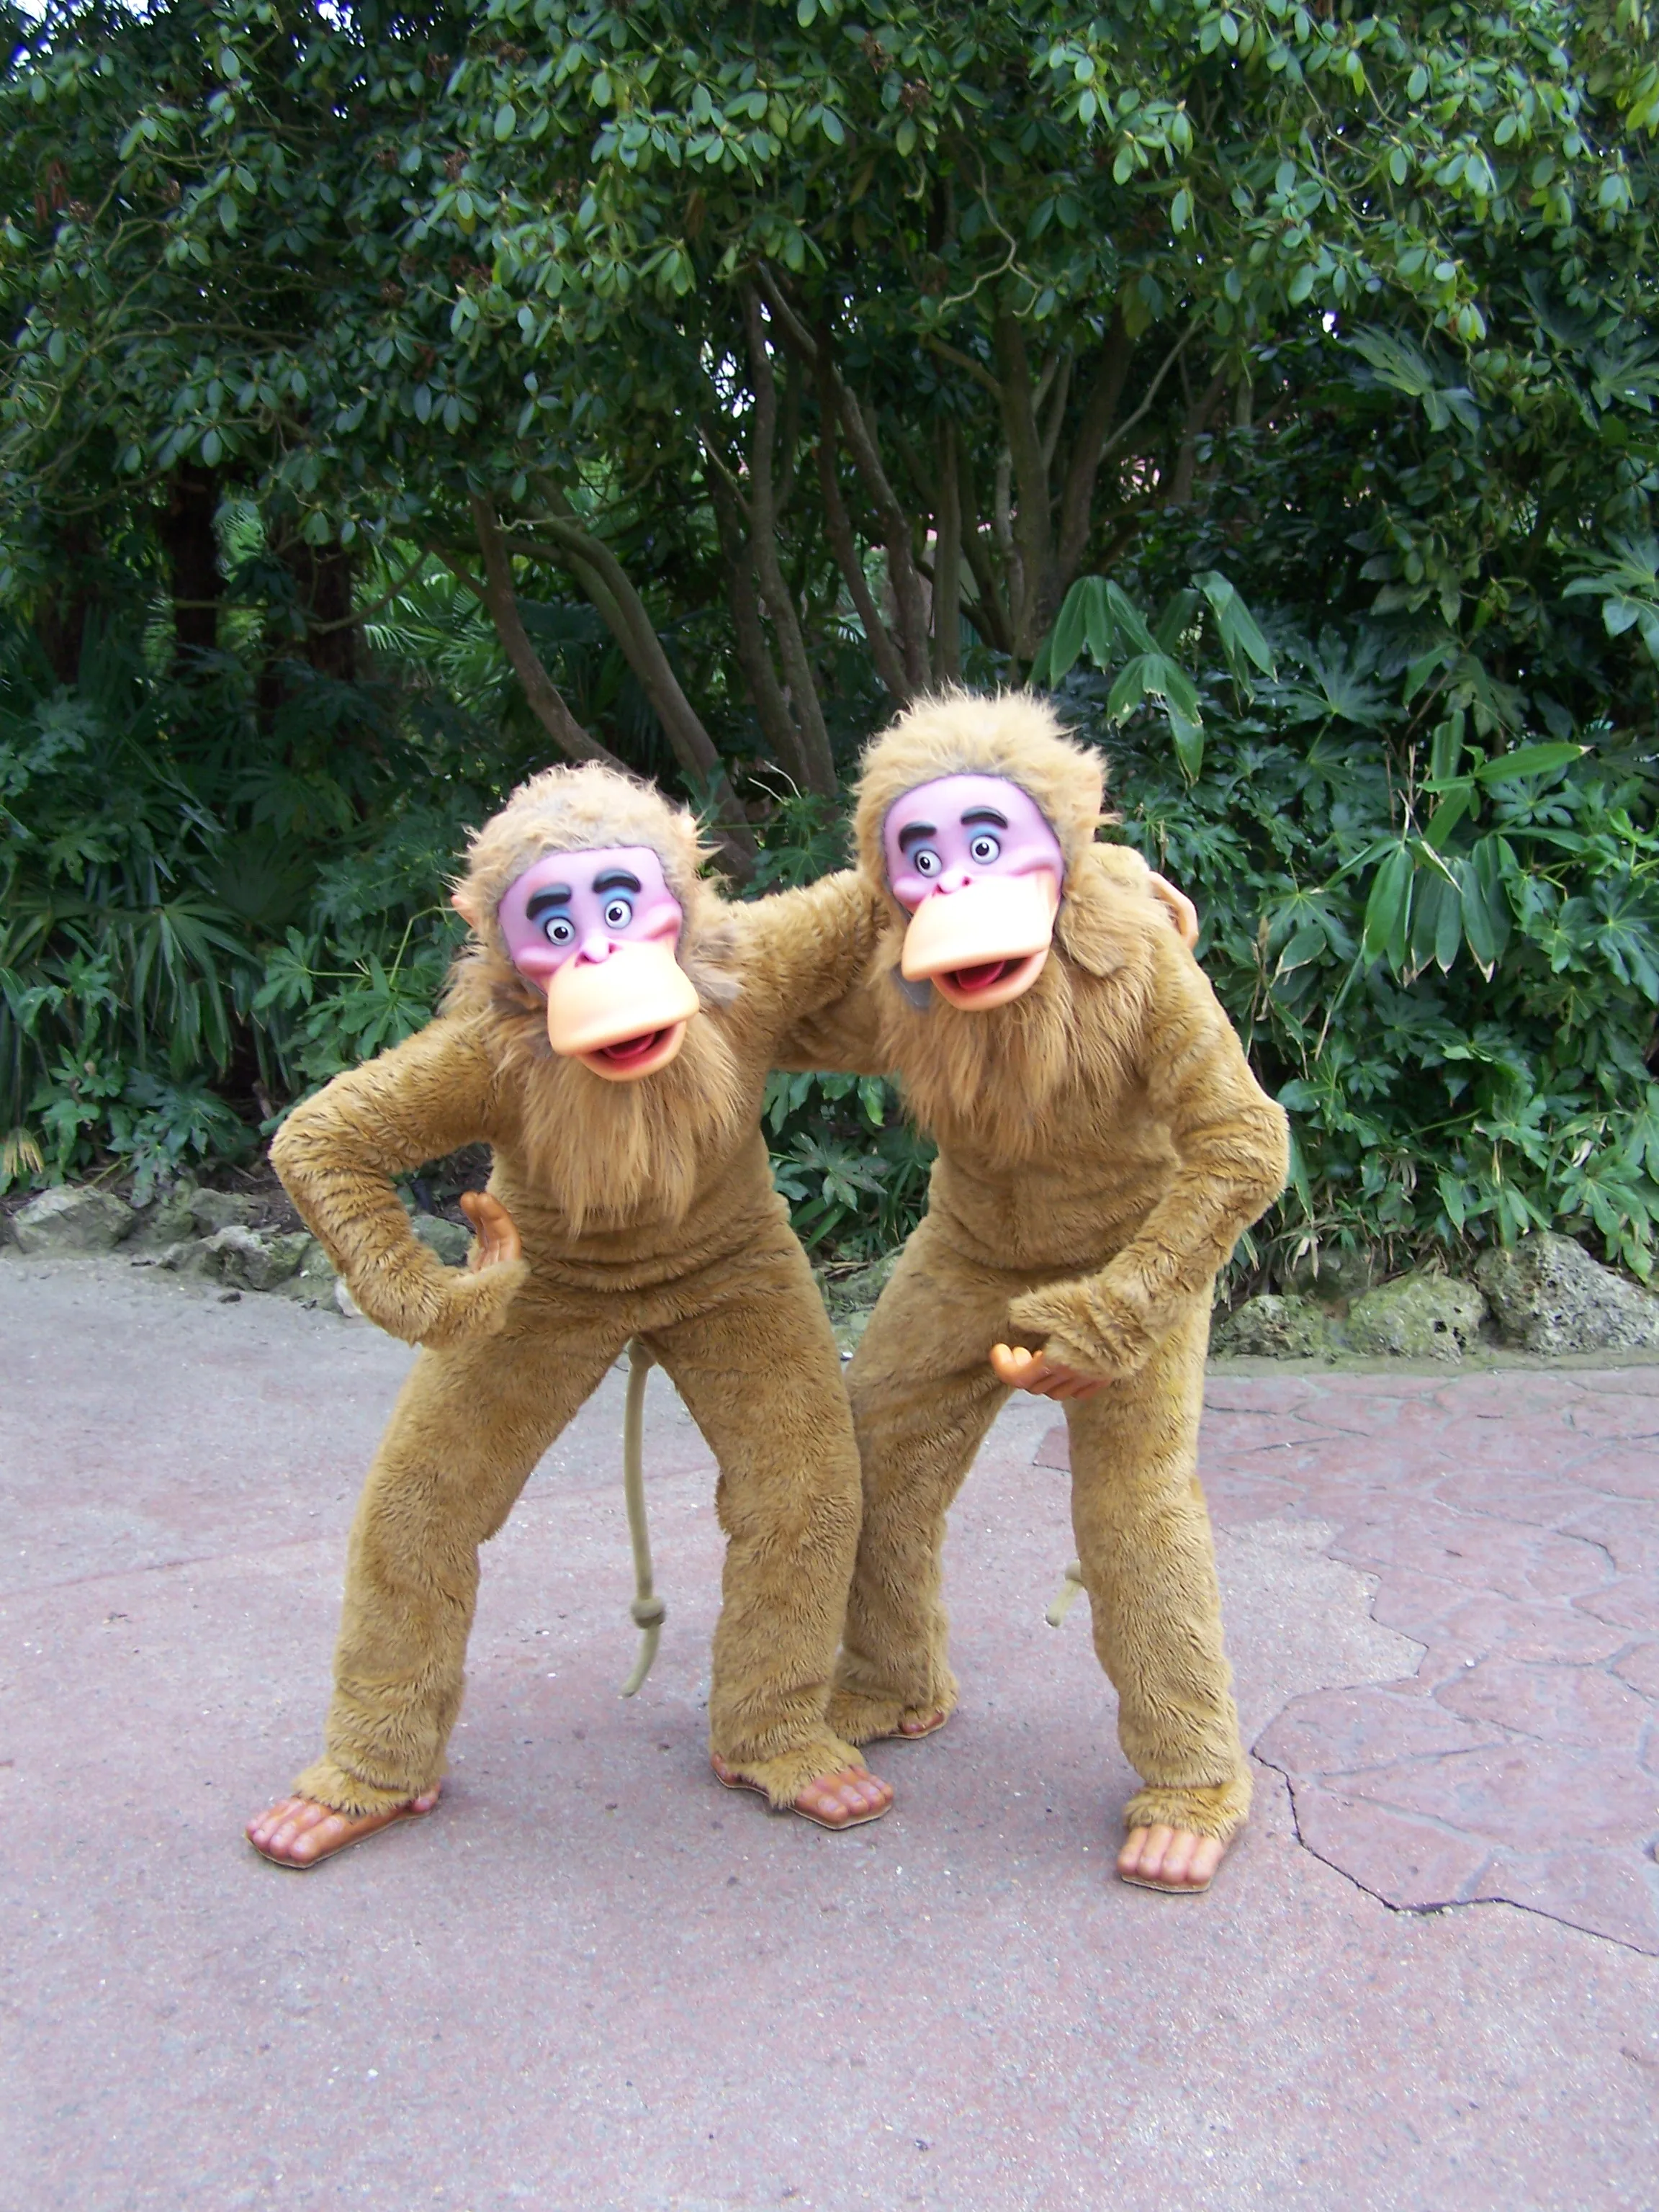 The monkeys from The Jungle Book came out for Meet'n'Greets for years, but sadly have disappeared for some time now. The last time they were out was on the 12th of April 2012 during the 20th Anniversary Celebrations that day.